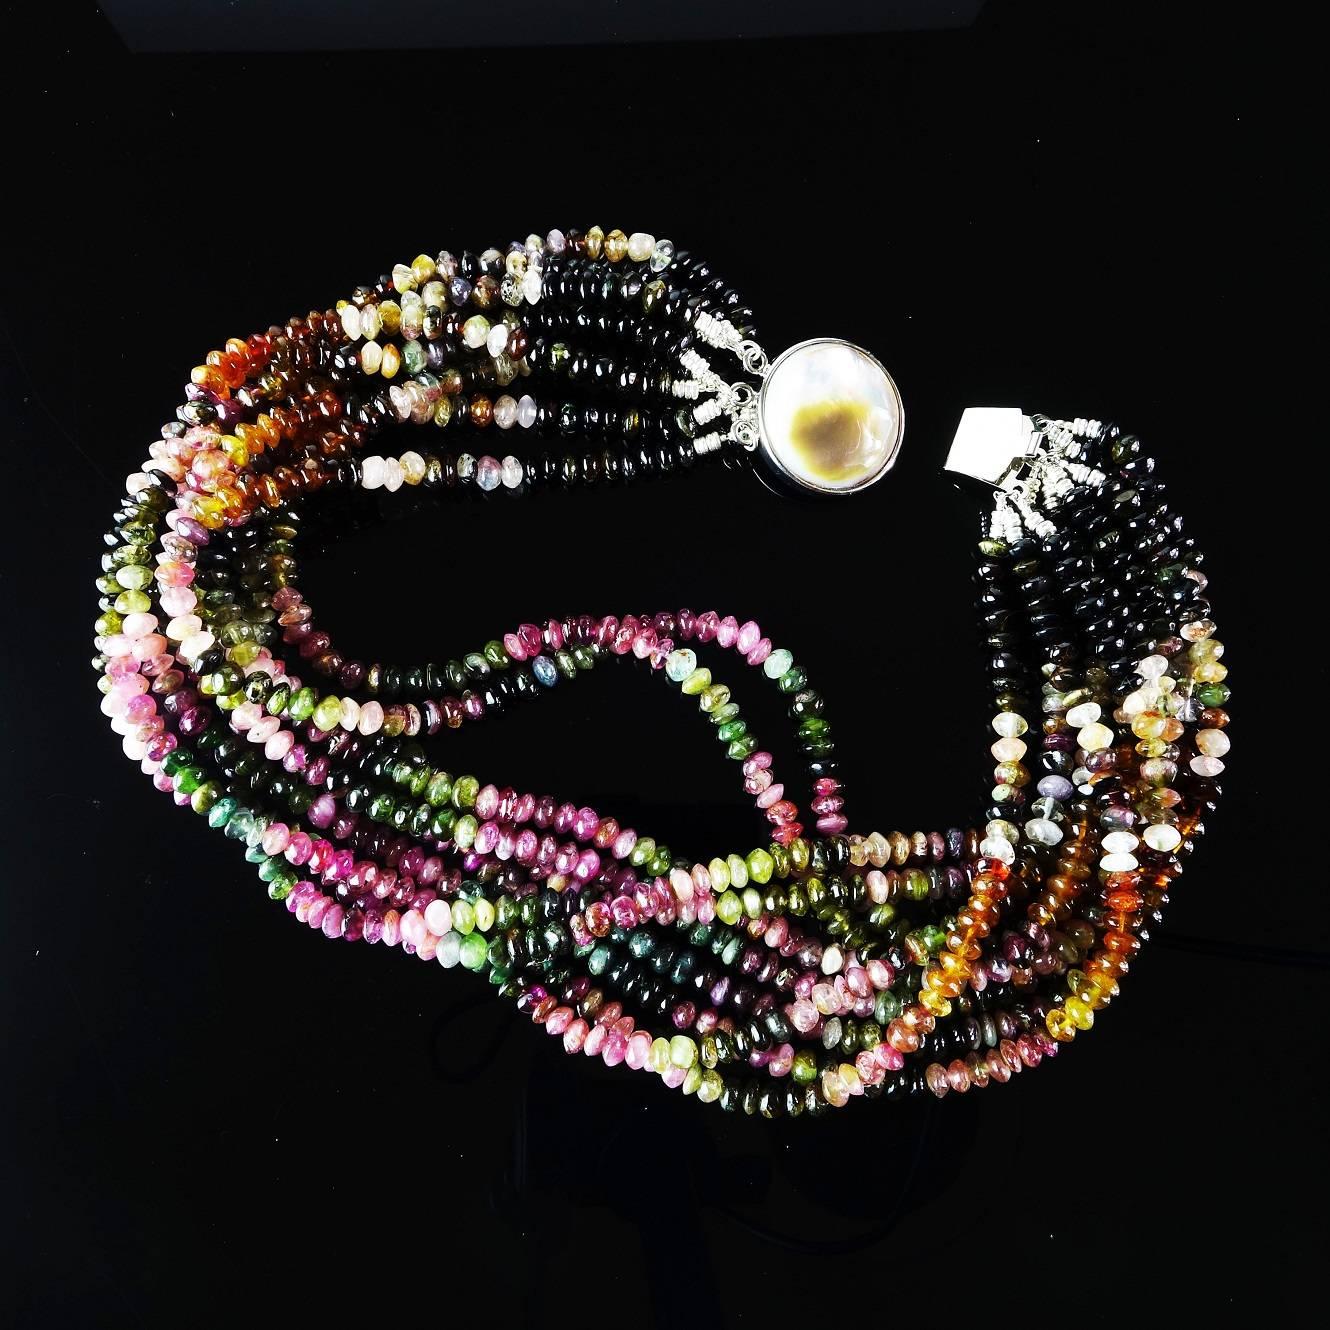 Tourmaline, Tourmaline, Tourmaline in ten strands of multi color rondels custom made necklace. At 16.5 inches this necklace can be worn as is or given a twist or two for a different look. The box clasp is mother of pearl. Tourmaline is the October